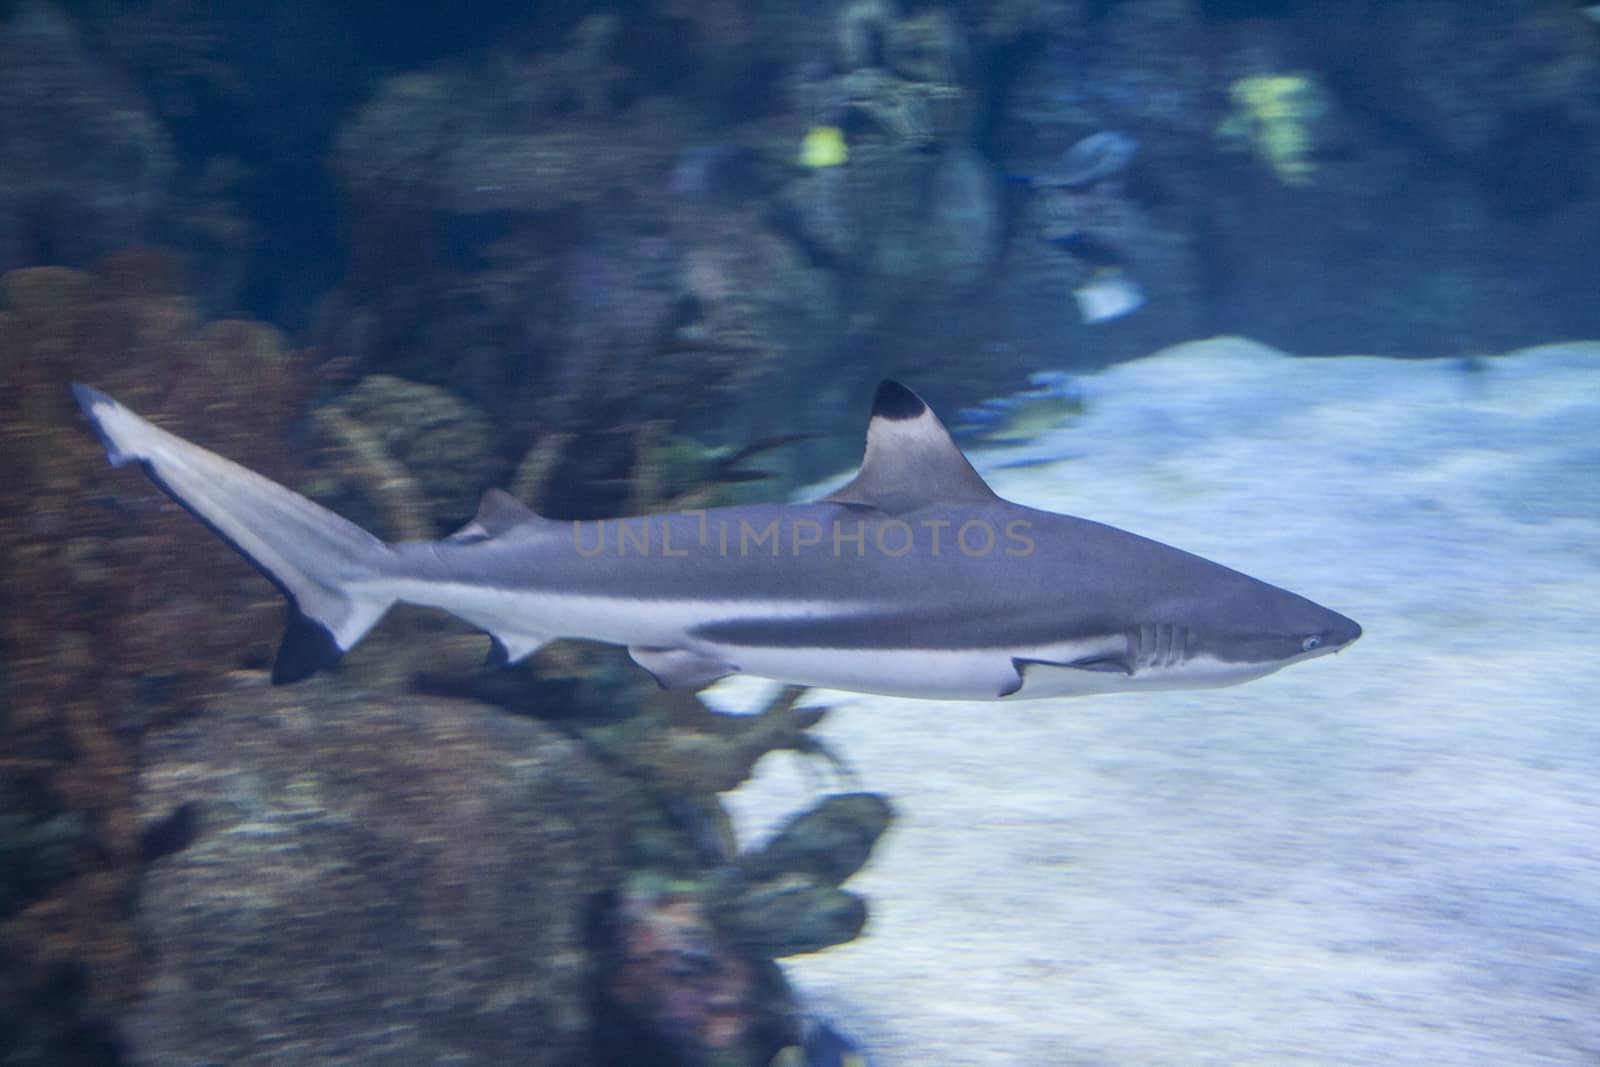 The blacktip reef shark Carcharhinus melanopterus is a species of requiem shark, in the family Carcharhinidae, easily identified by the prominent black tips on its fins .